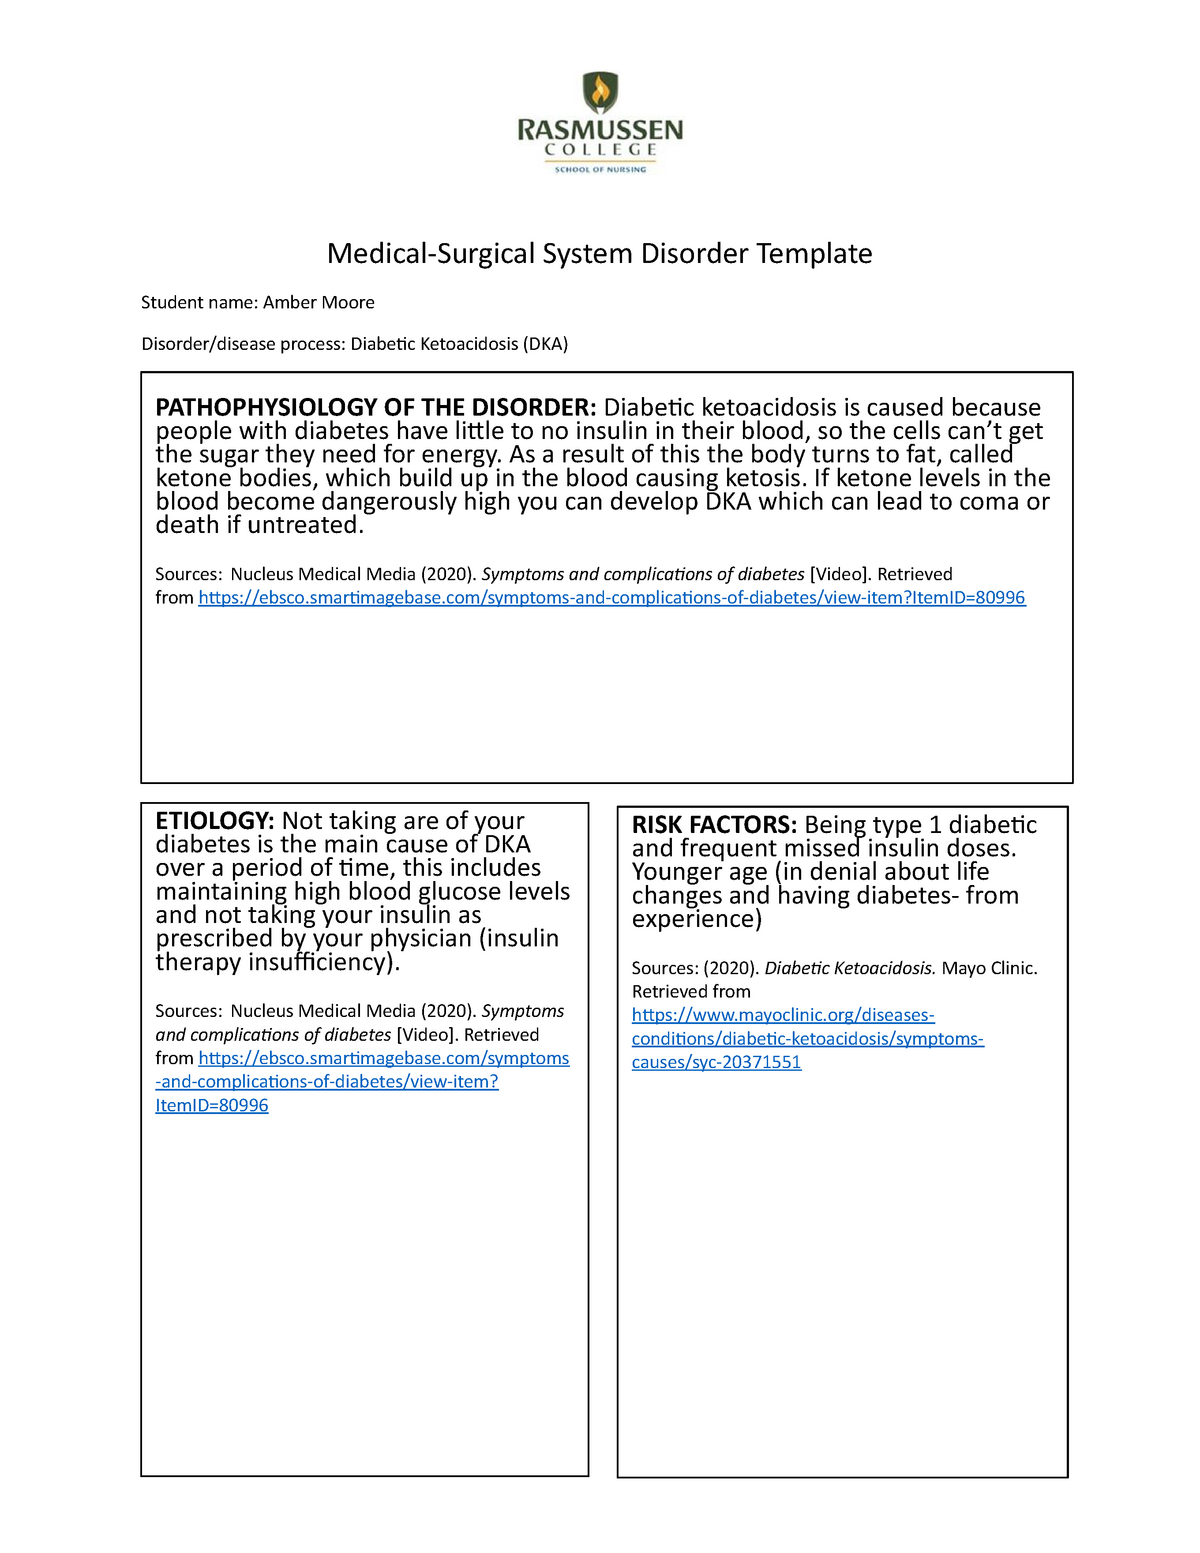 Diabetic Ketoacidosis System Disorder Template